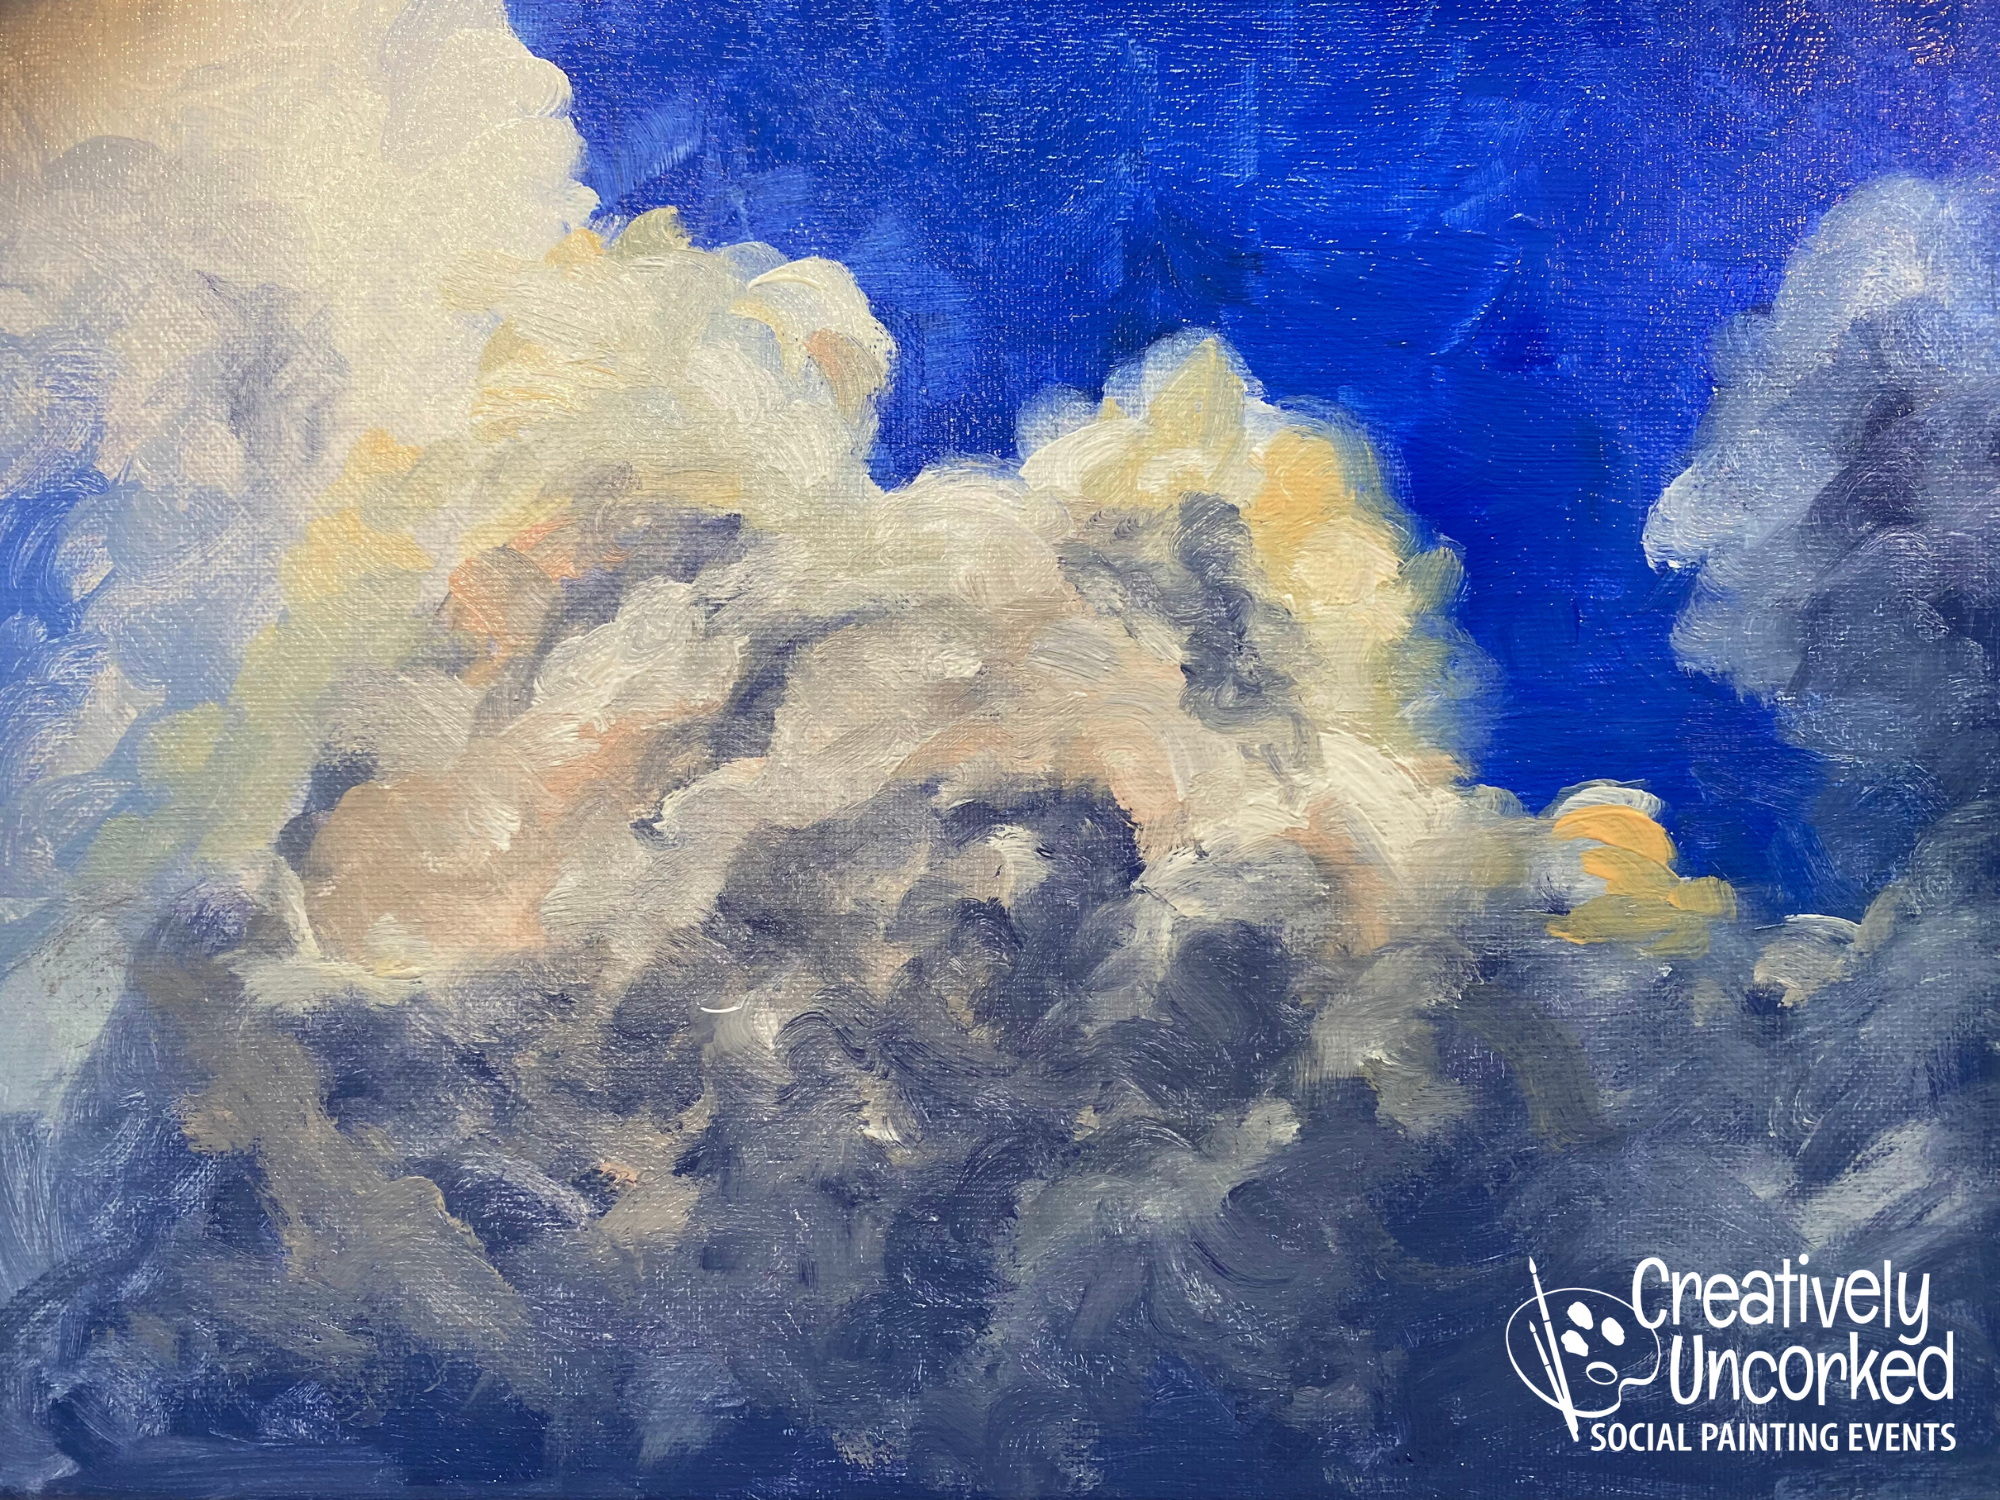 Billowy Clouds from Creatively Uncorked http://creativelyuncorked.com/